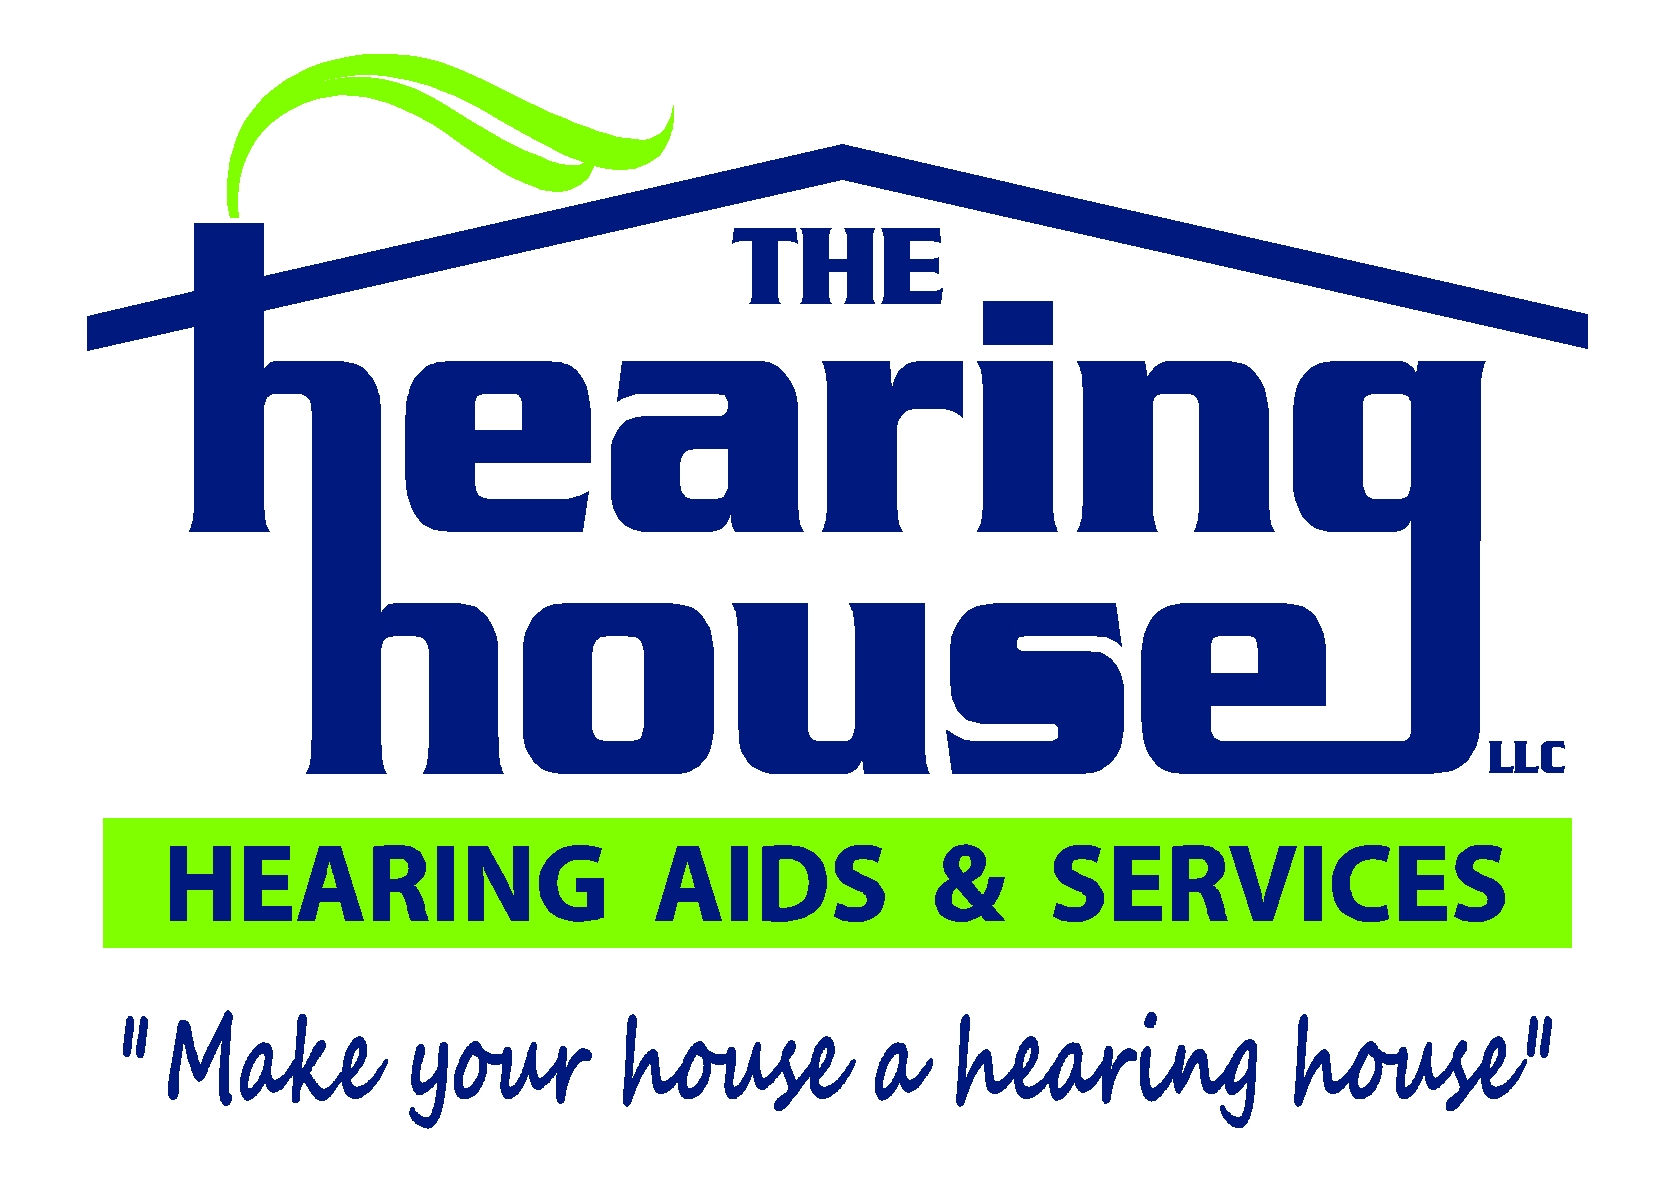 The Hearing House